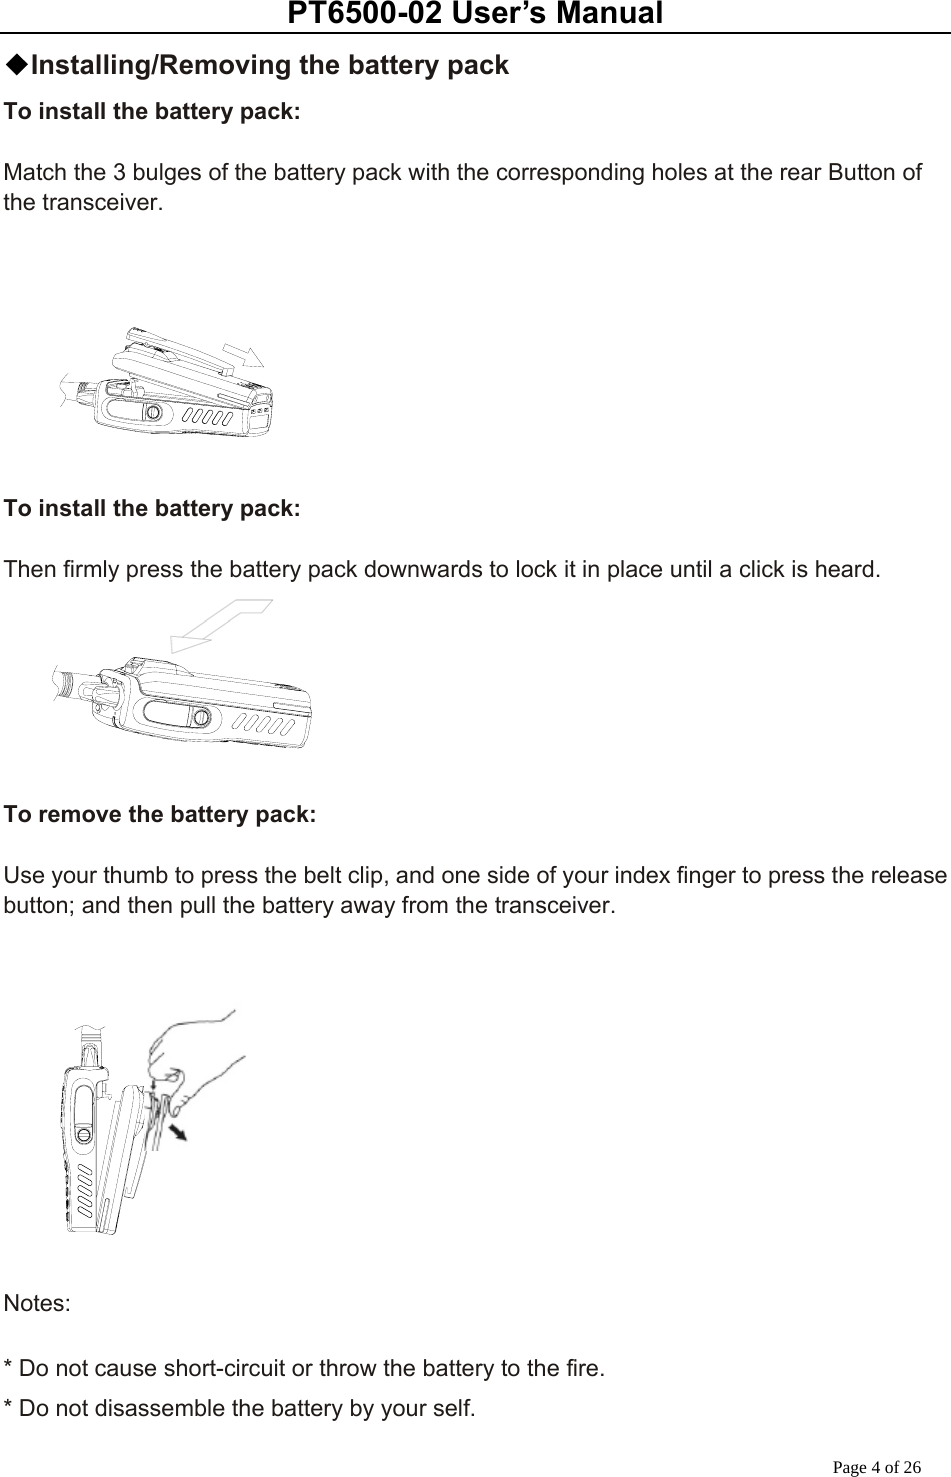 PT6500-02 User’s Manual Page 4 of 26 ◆Installing/Removing the battery pack To install the battery pack:  Match the 3 bulges of the battery pack with the corresponding holes at the rear Button of the transceiver.        To install the battery pack:  Then firmly press the battery pack downwards to lock it in place until a click is heard.       To remove the battery pack:  Use your thumb to press the belt clip, and one side of your index finger to press the release button; and then pull the battery away from the transceiver.      Notes:  * Do not cause short-circuit or throw the battery to the fire. * Do not disassemble the battery by your self. 